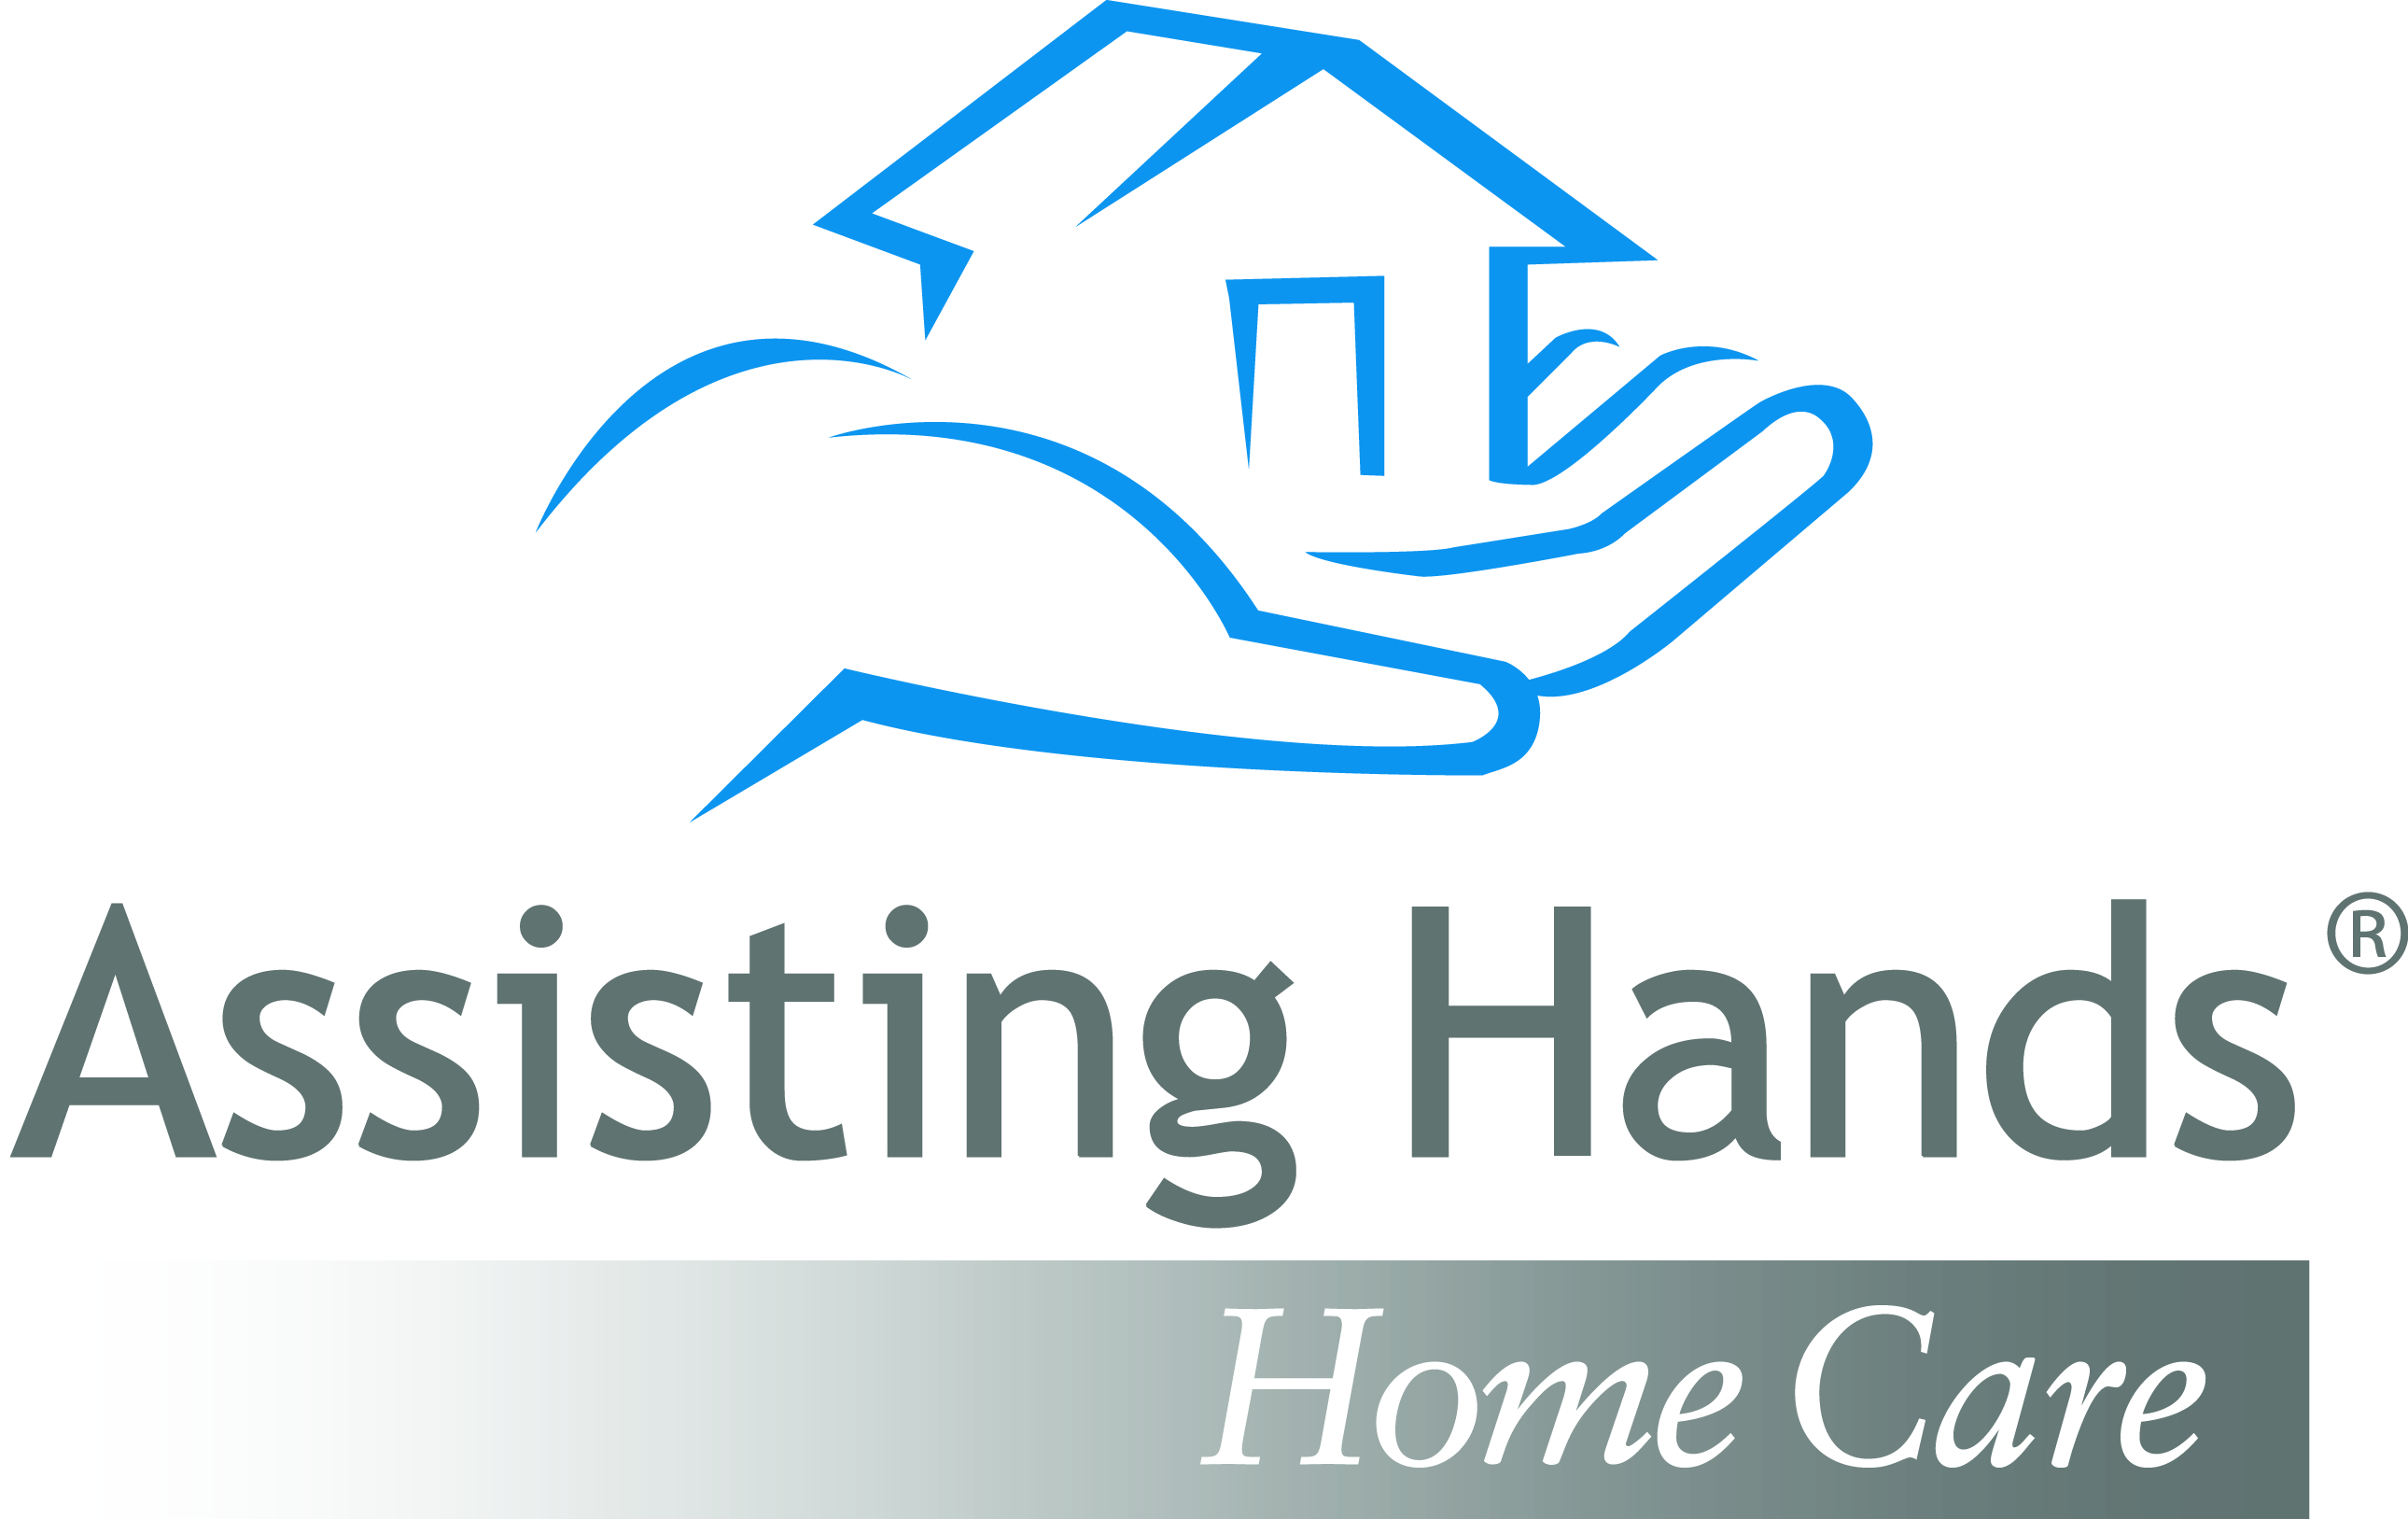 Assisting Hands Home Care of Cary, NC at Cary, NC